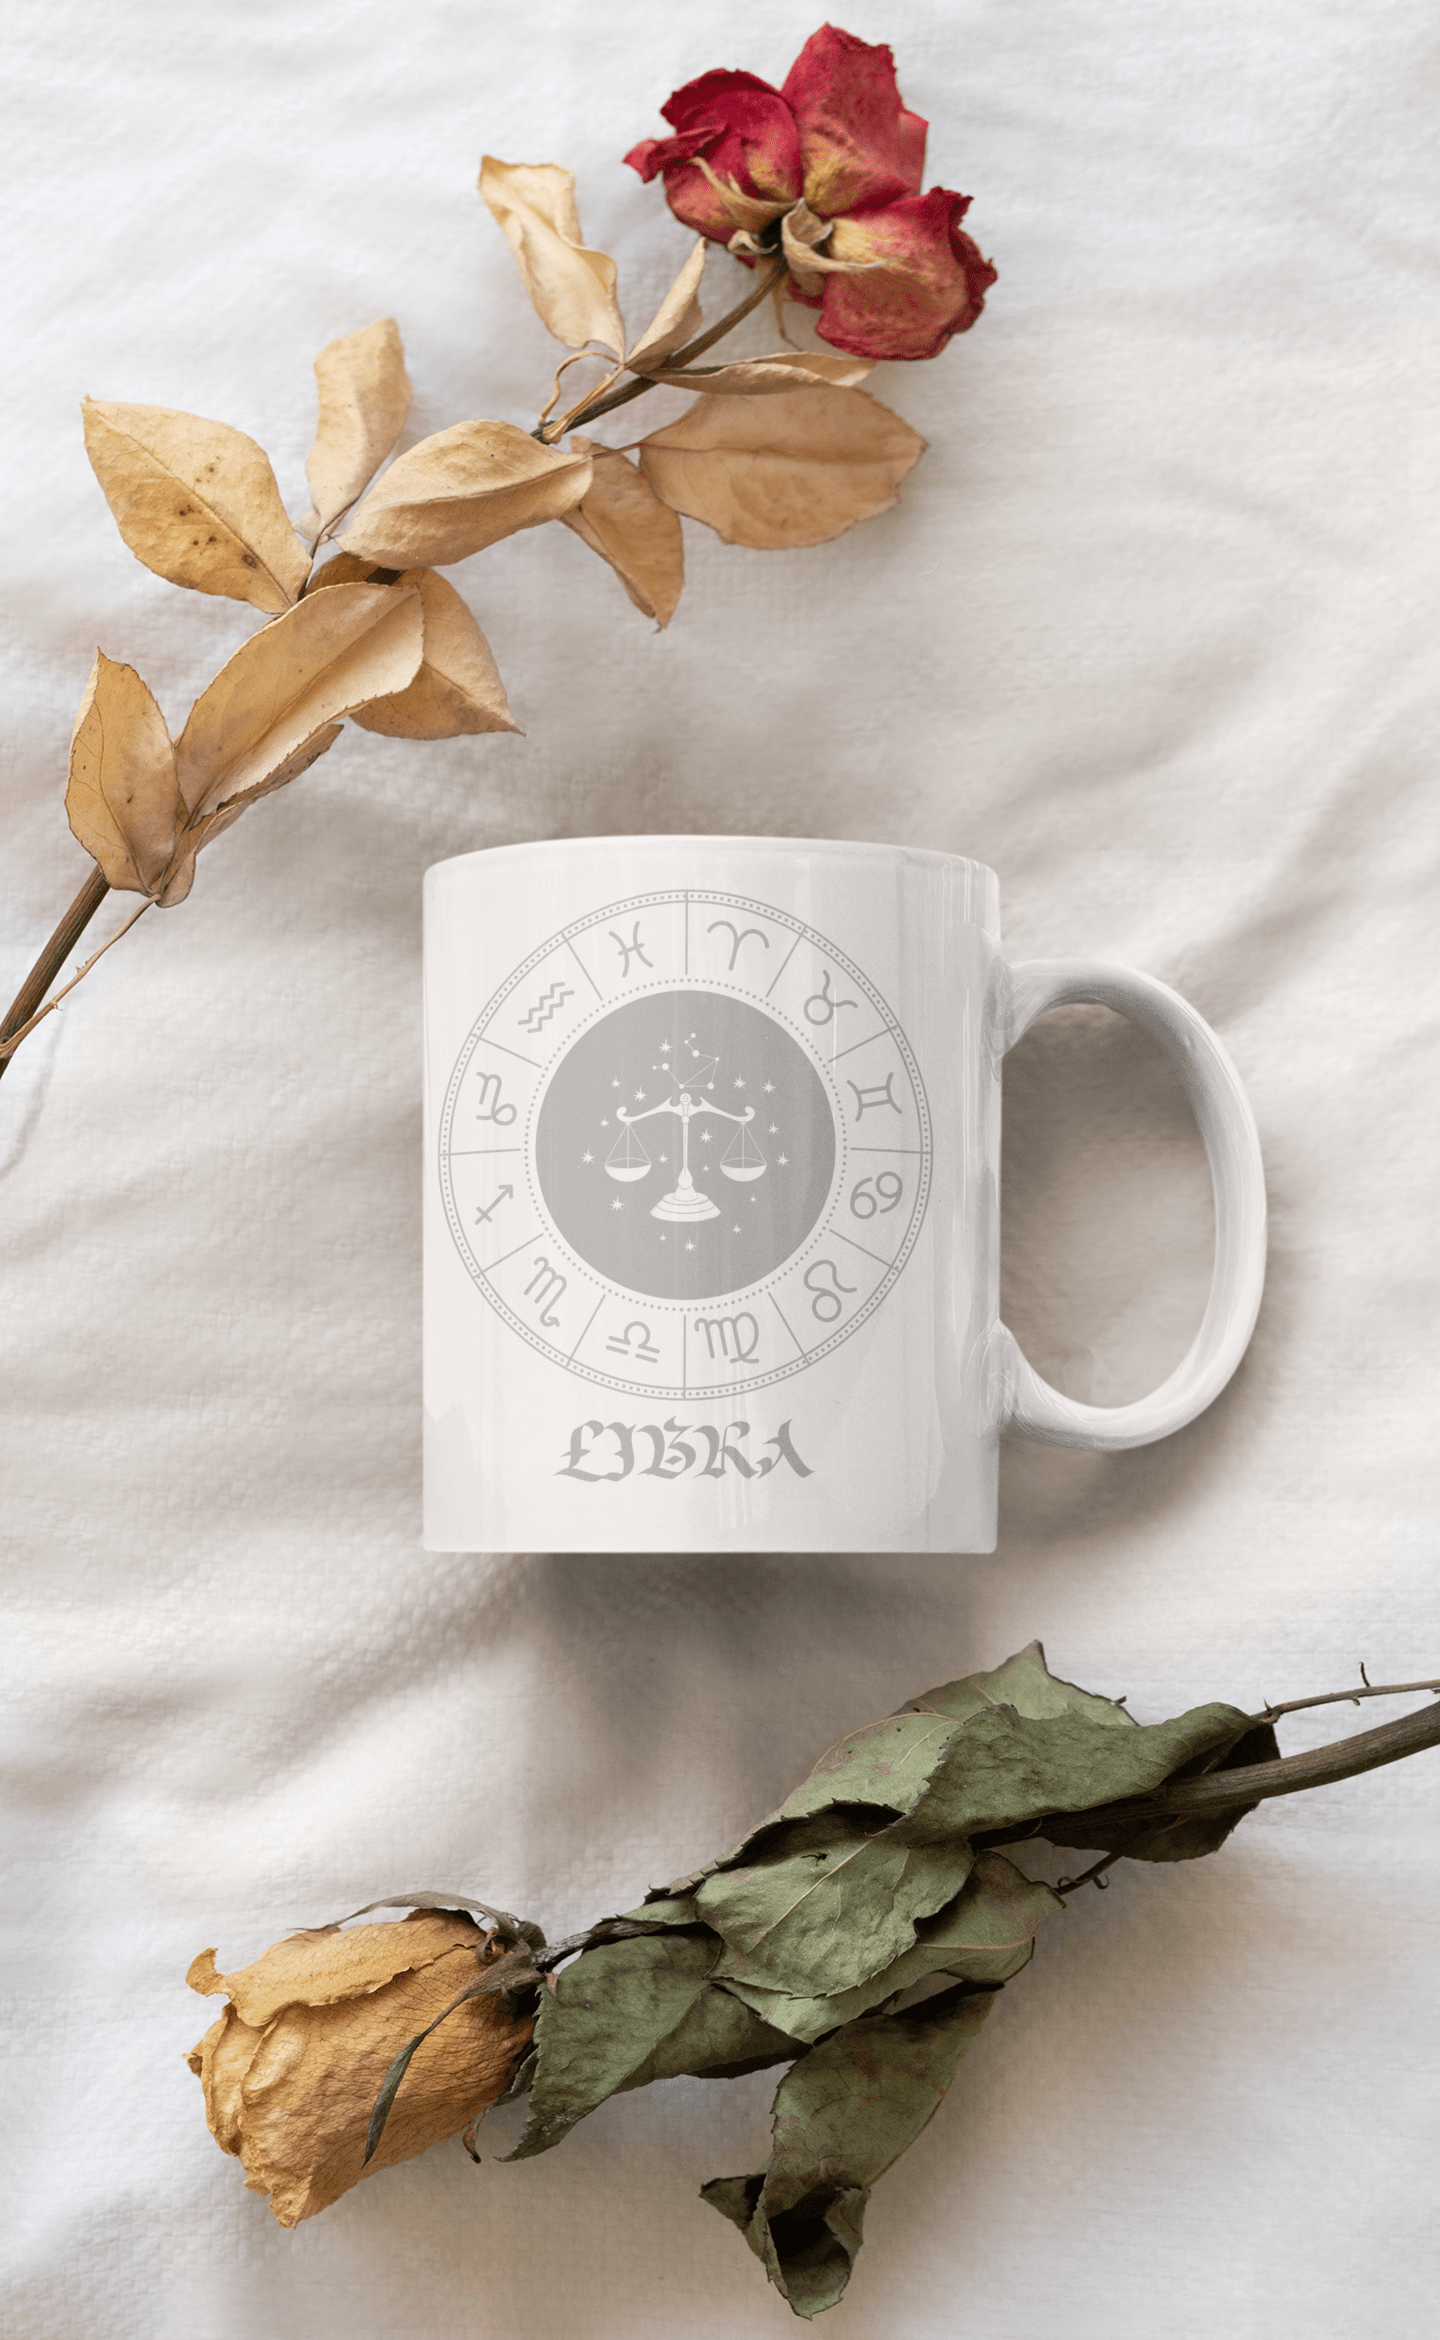 Libra Zodiac Star Sign Coffee Tea Cup Mug Mug A Moment Of Now Women’s Boutique Clothing Online Lifestyle Store